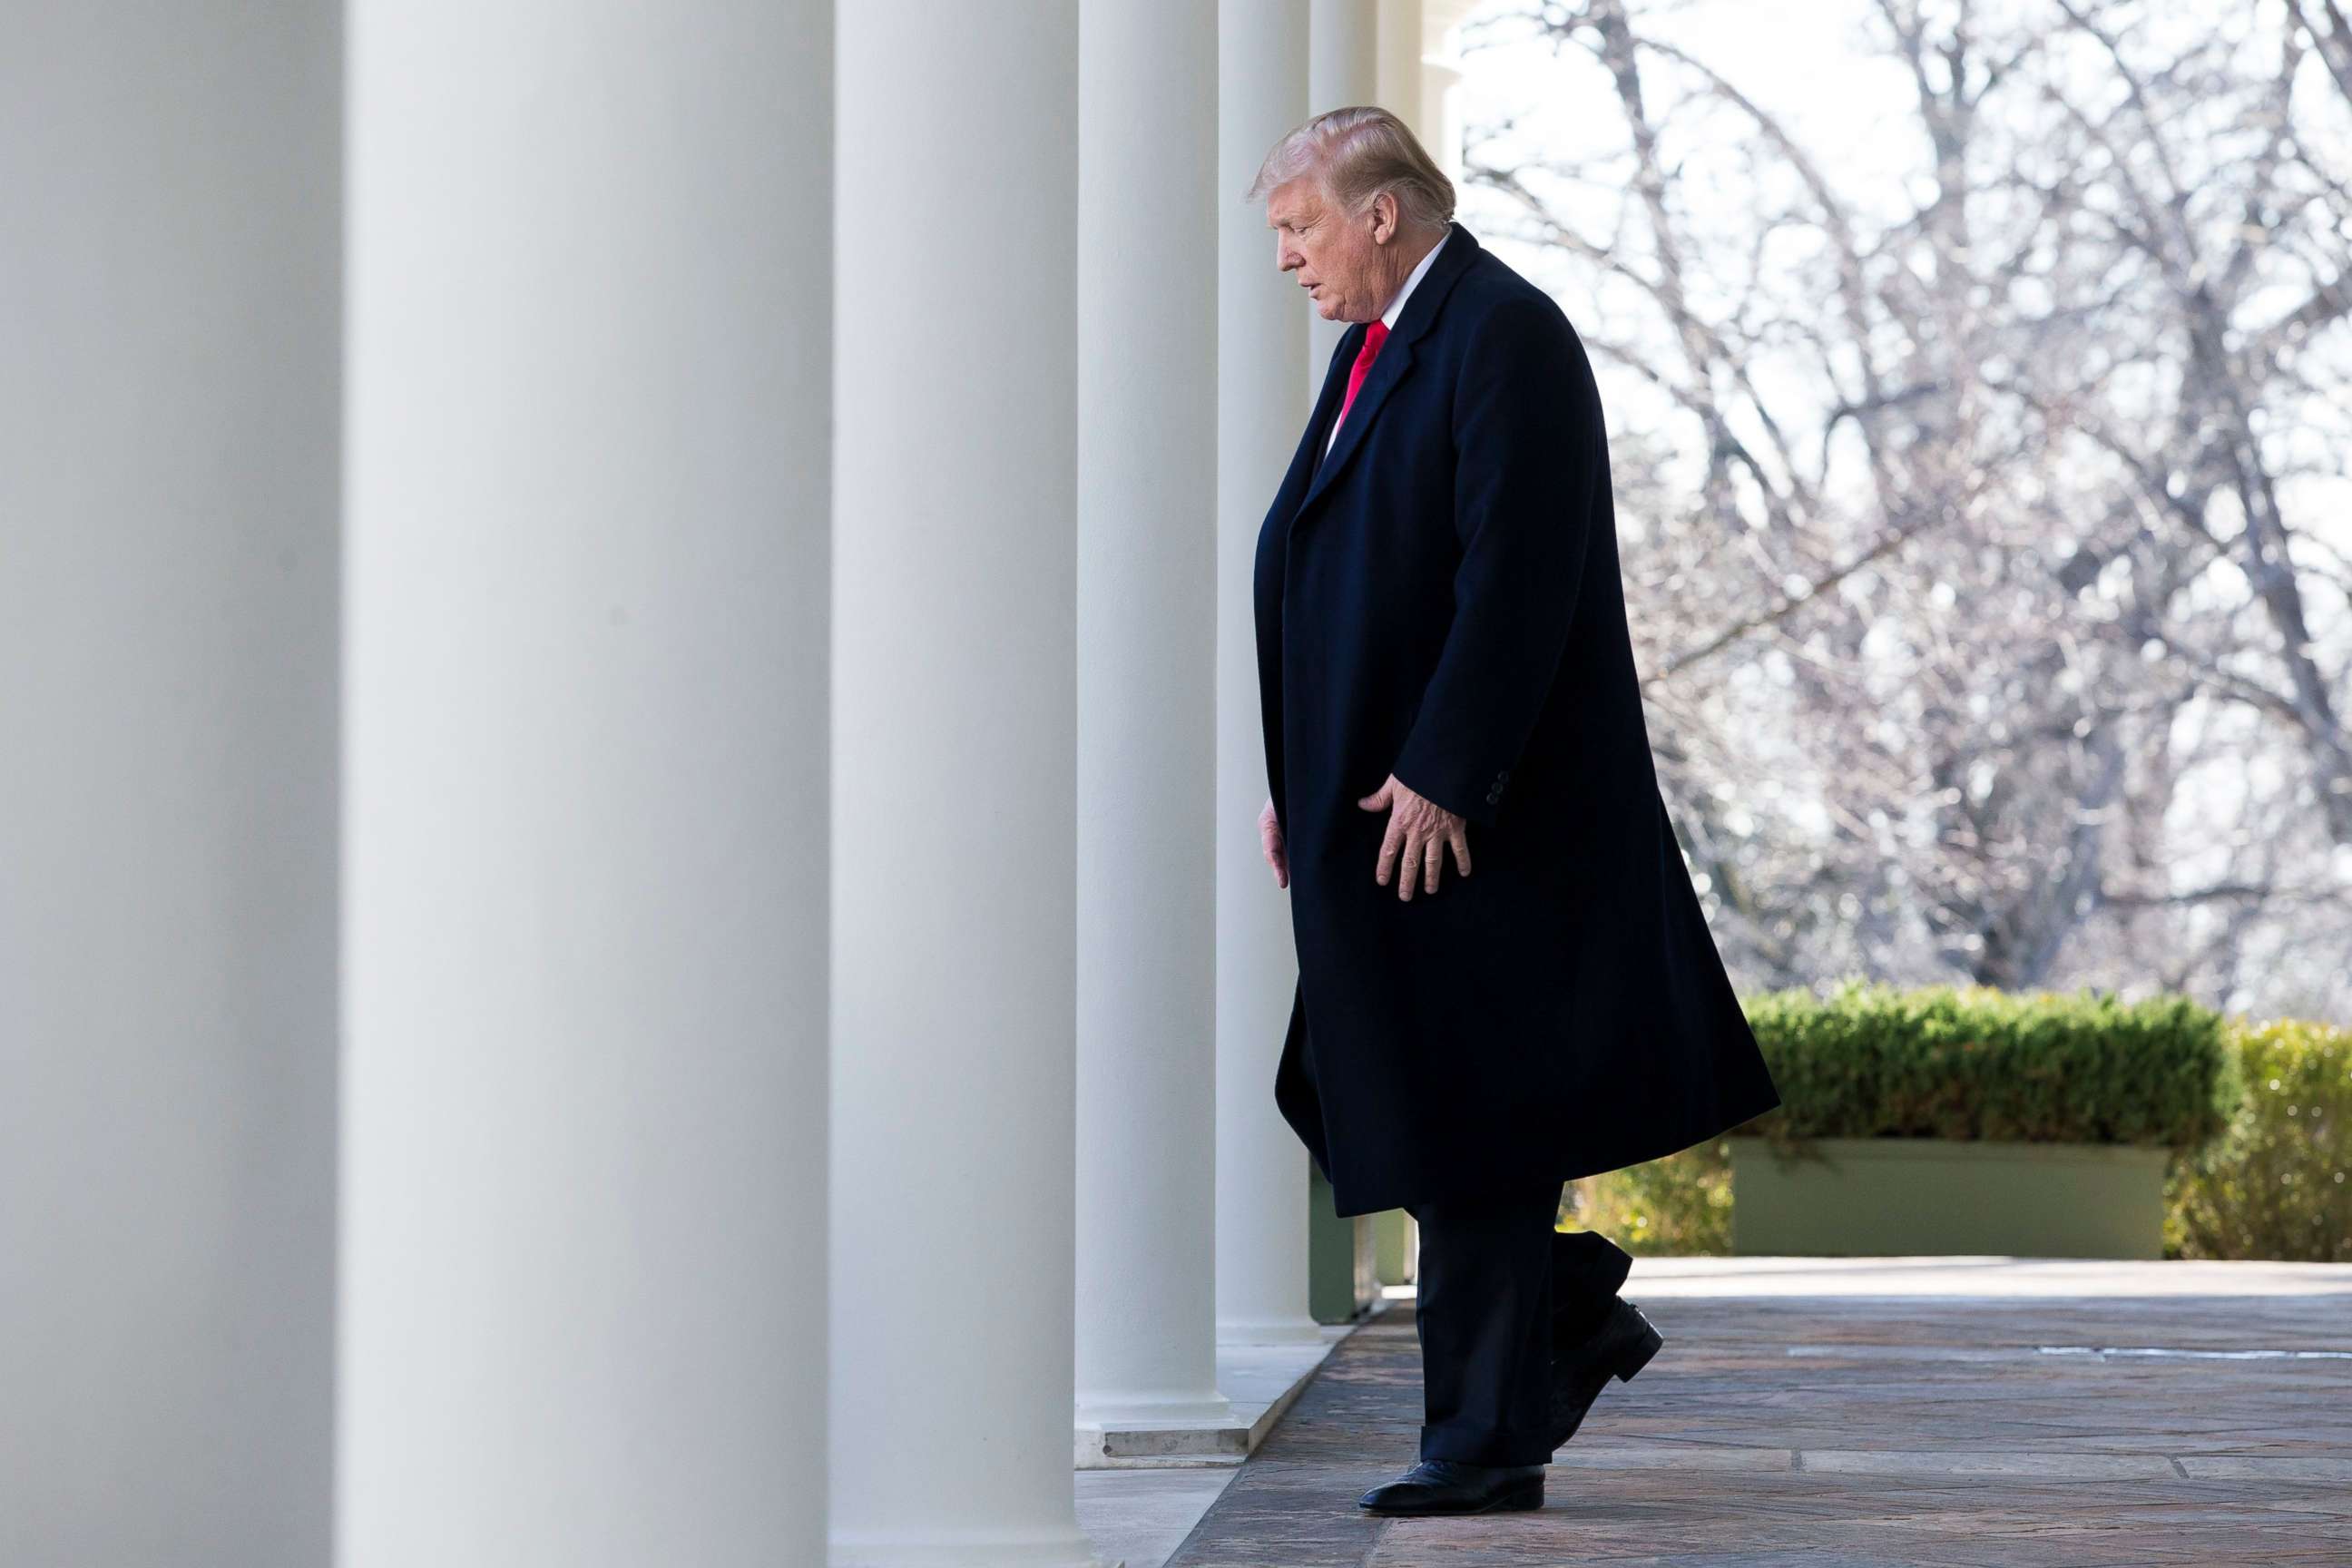 PHOTO: President Donald Trump walks down the Colonnade to deliver remarks on ending the partial shutdown of the federal government, in the Rose Garden of the White House in Washington, Jan. 25, 2019.